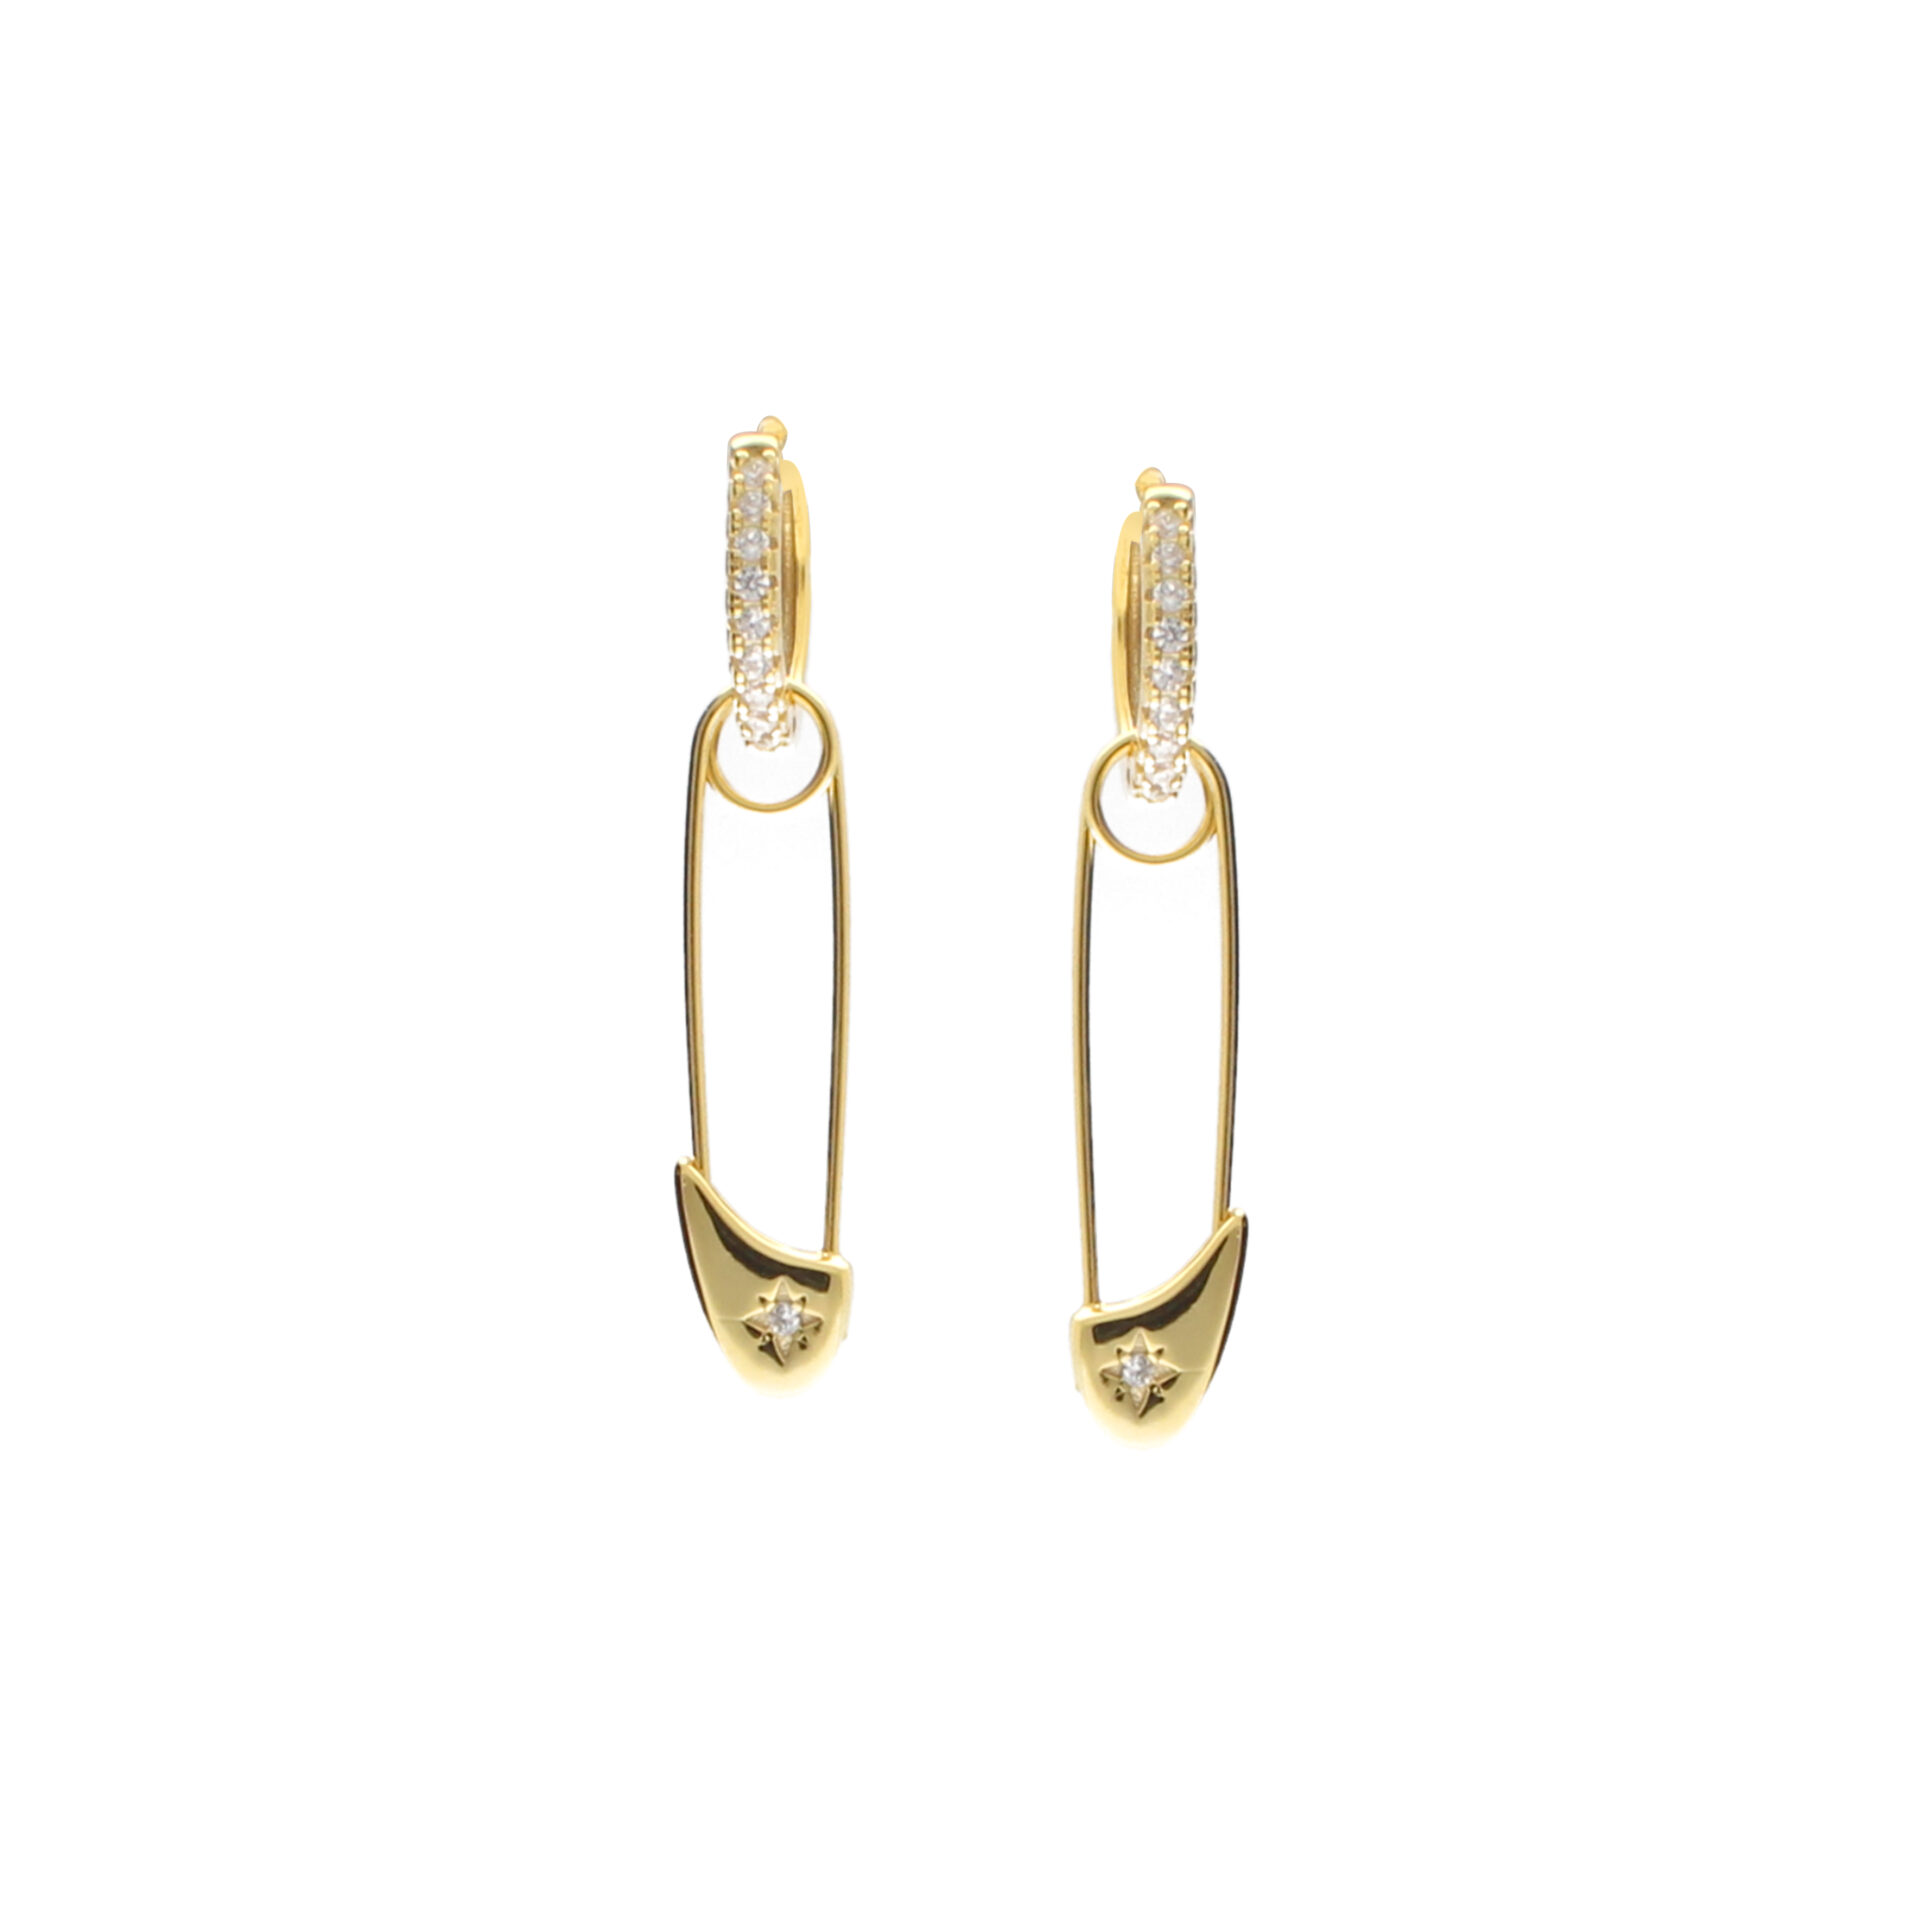 safety pin earrings front